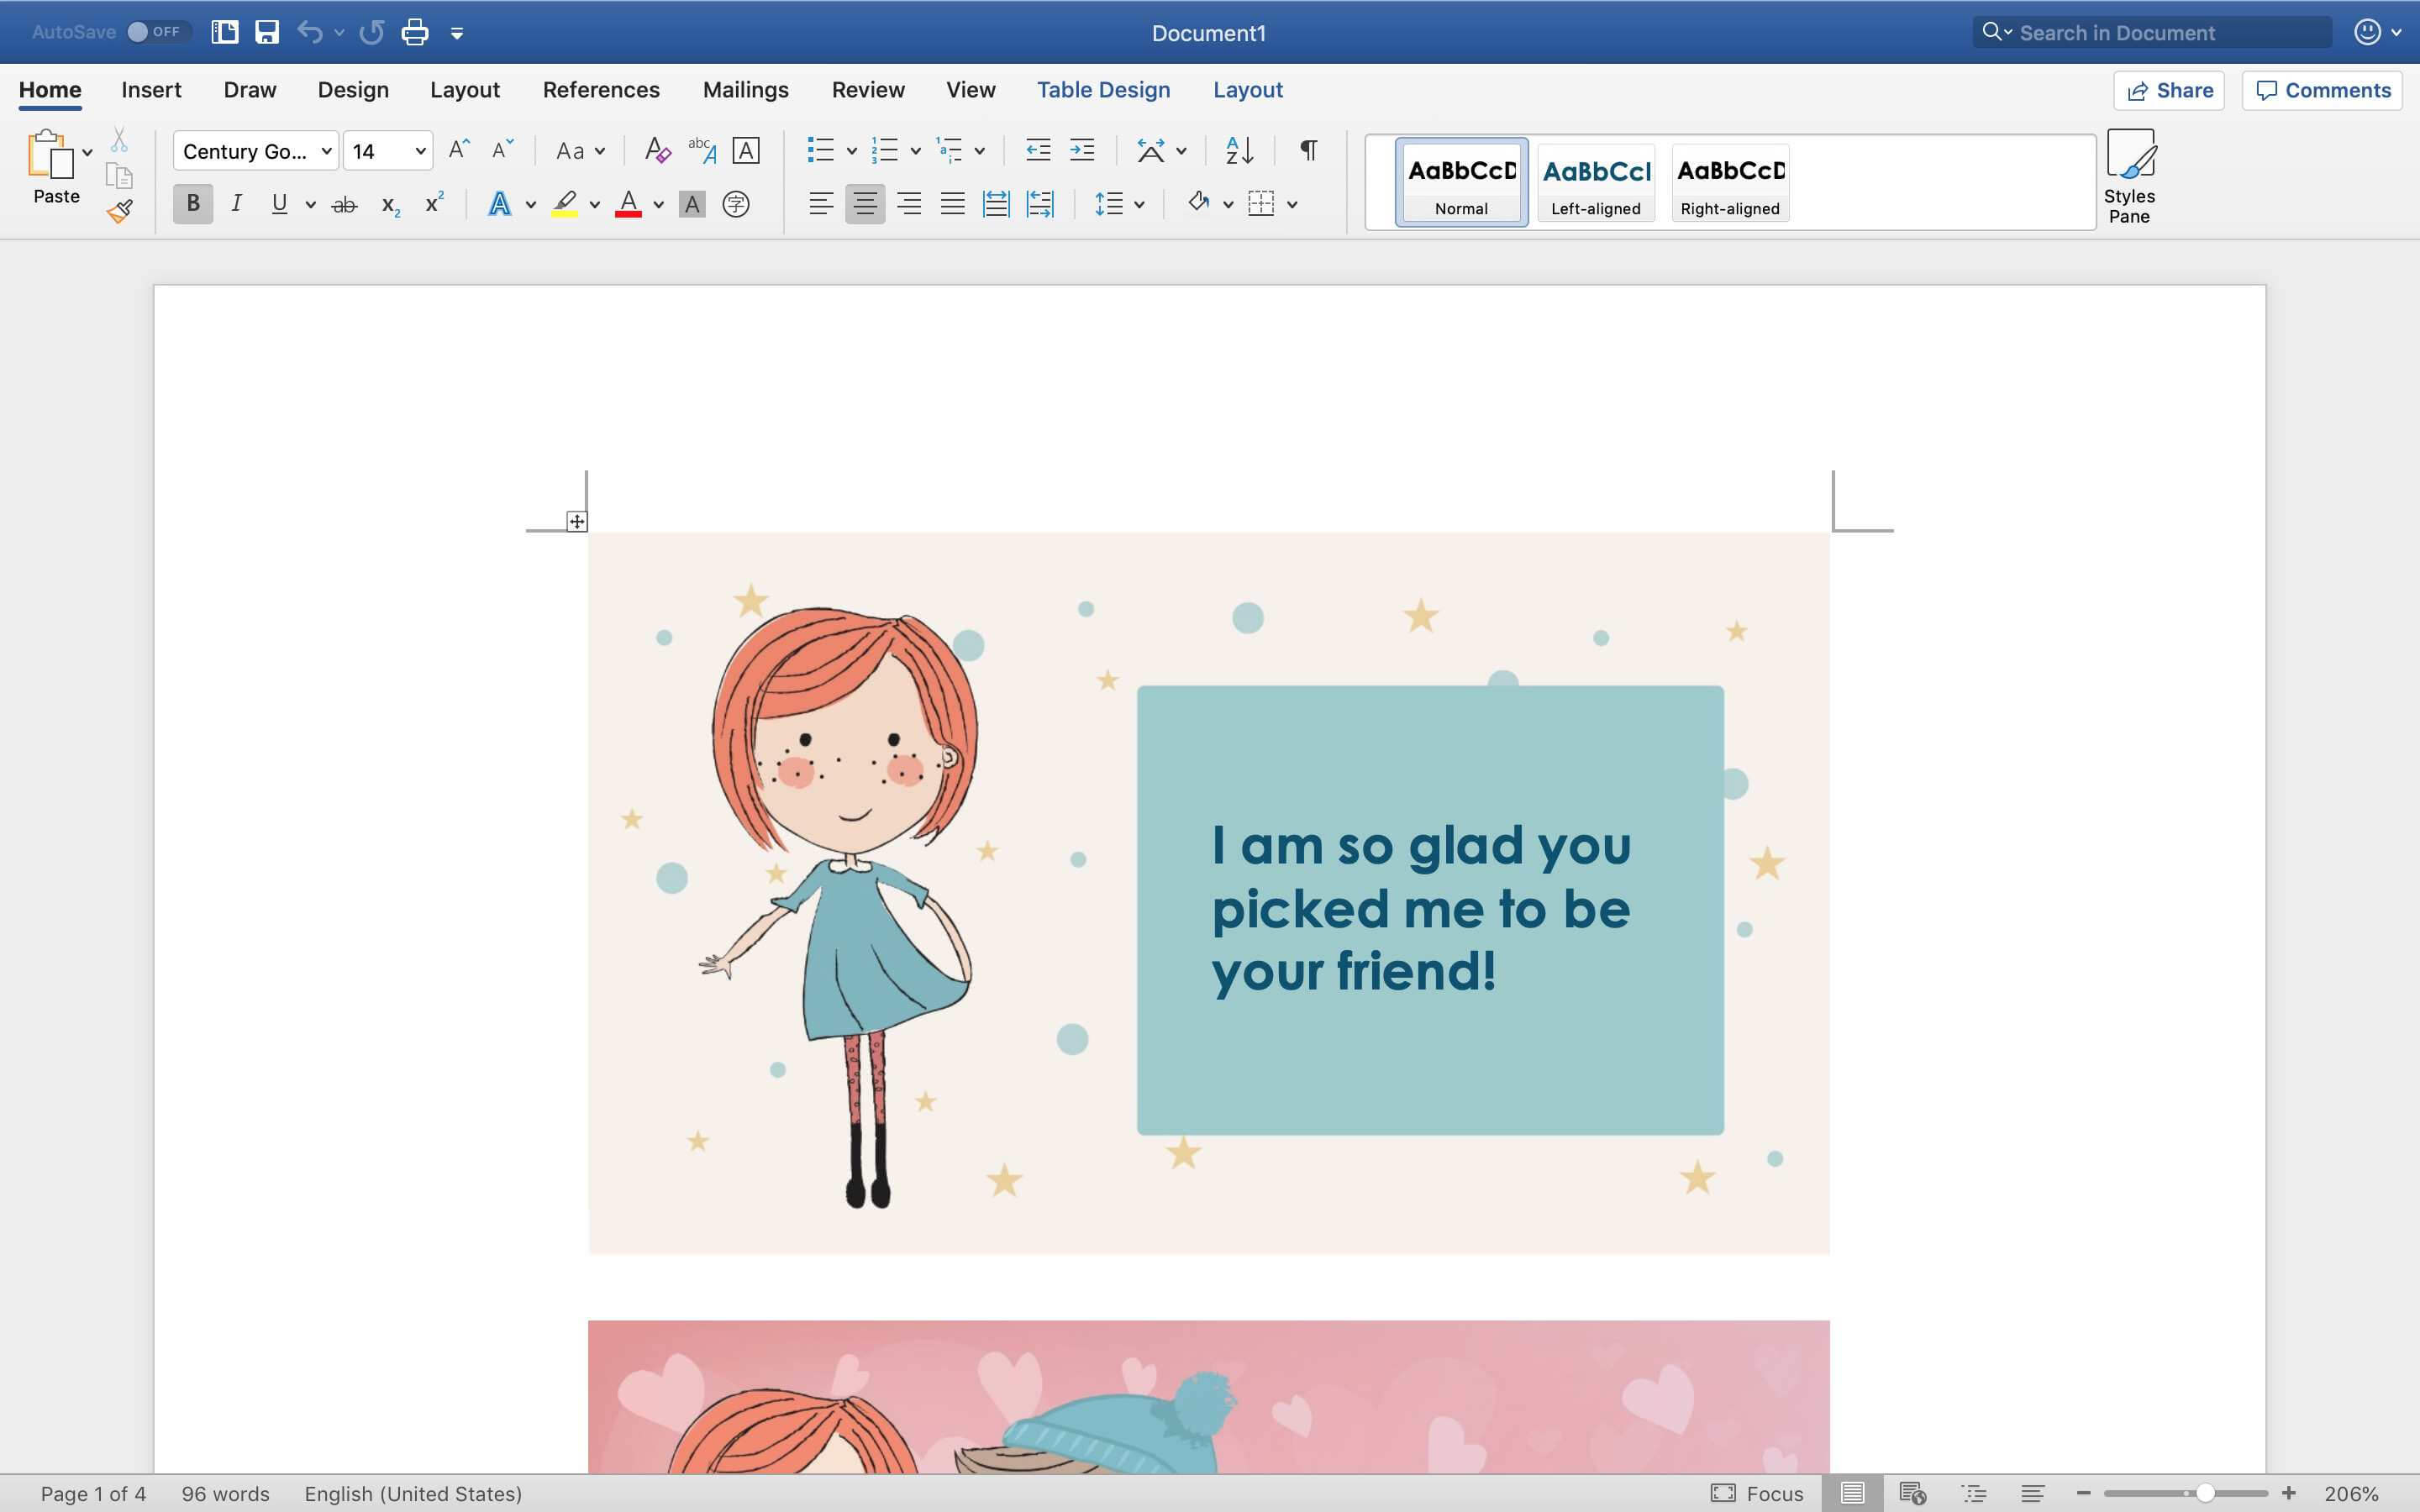 Free Valentine's Day Templates For Ms Office Intended For Valentine Card Template Word